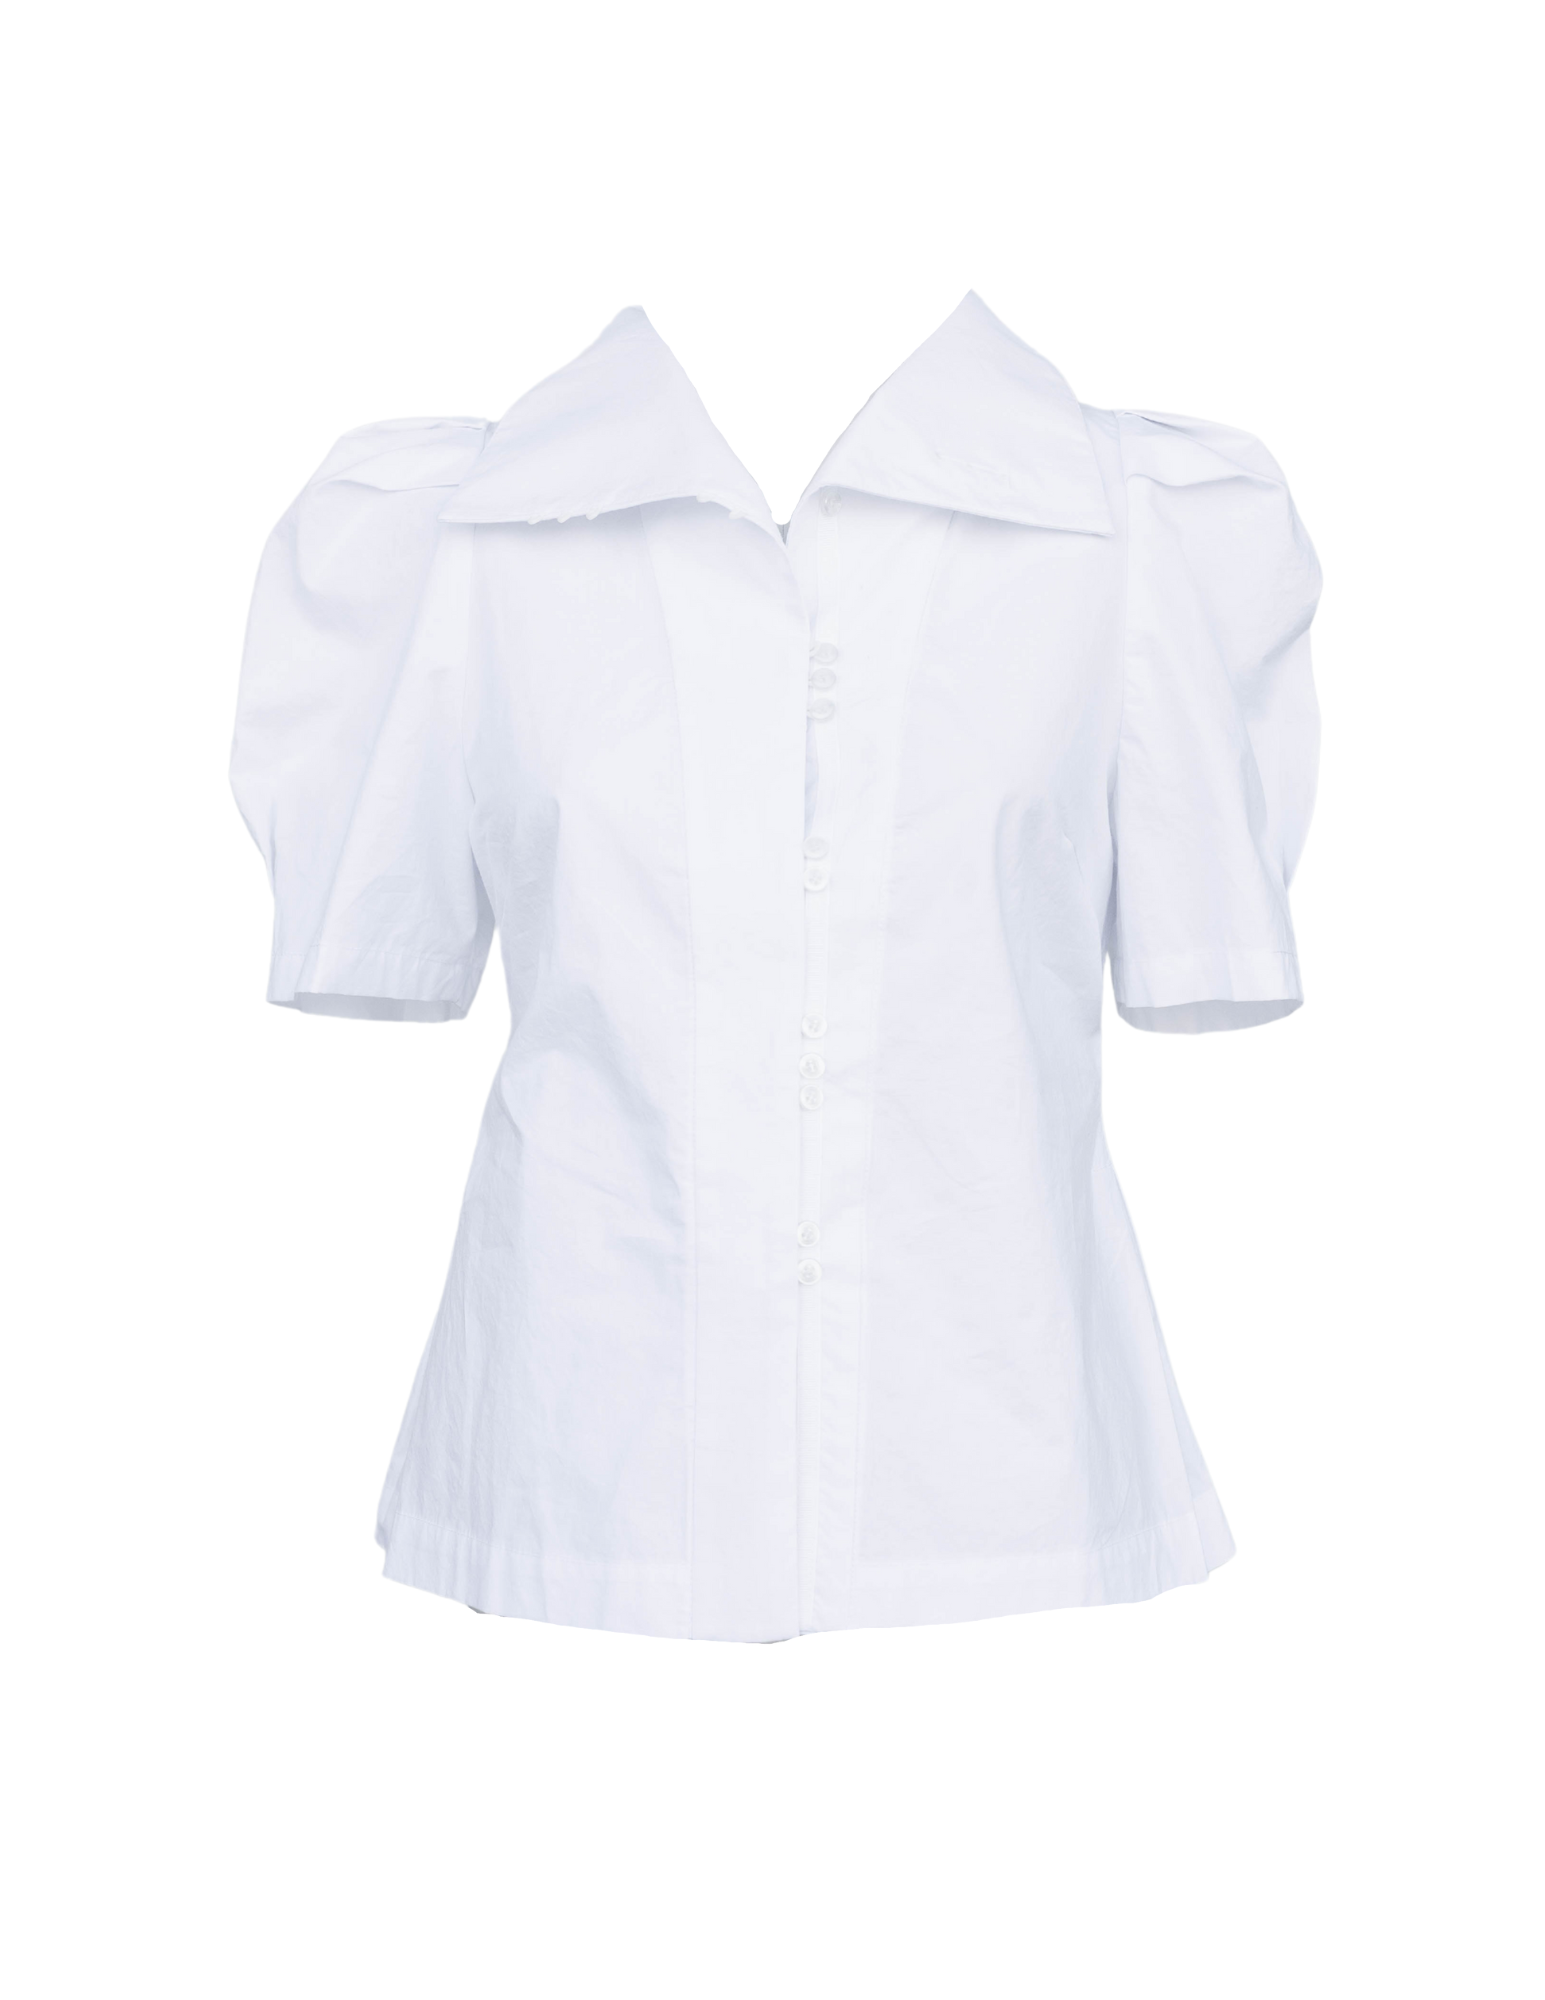 Adelyn Top - White